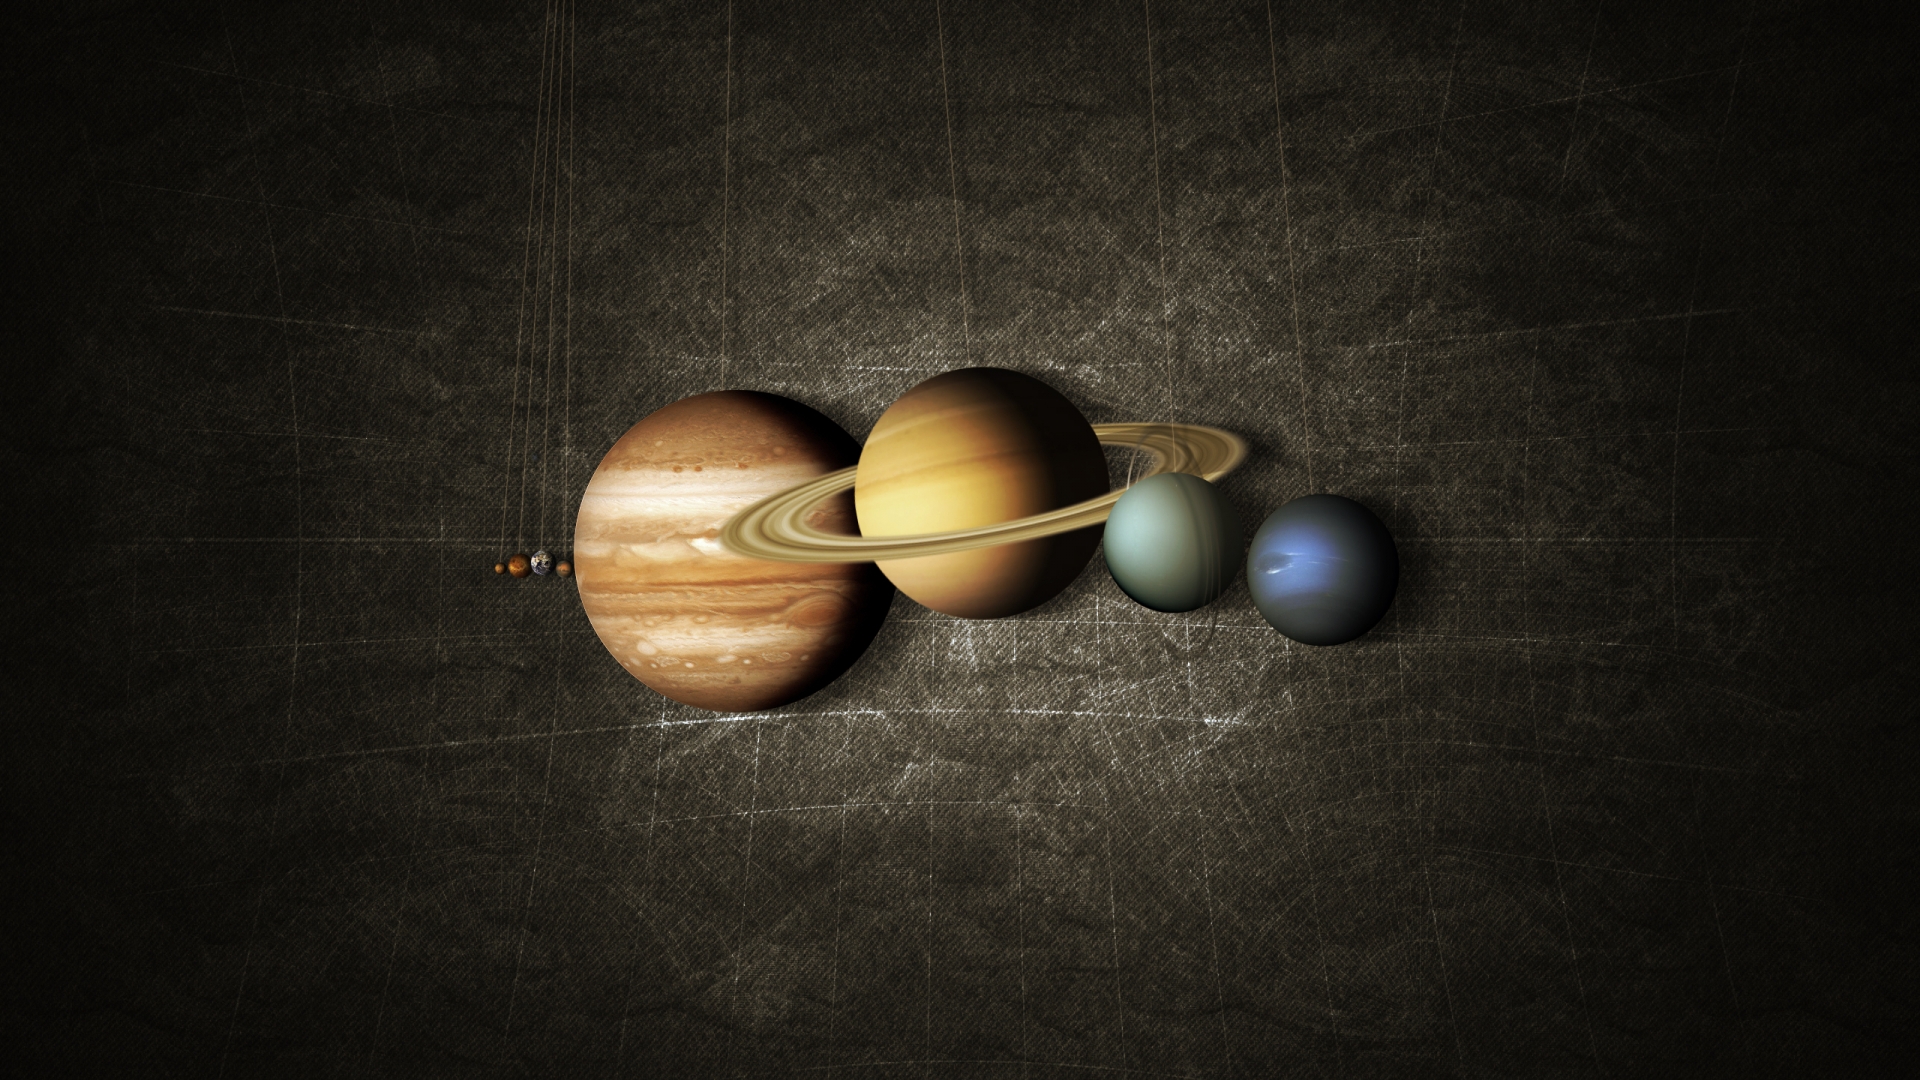 Planets Aligned for 1920 x 1080 HDTV 1080p resolution